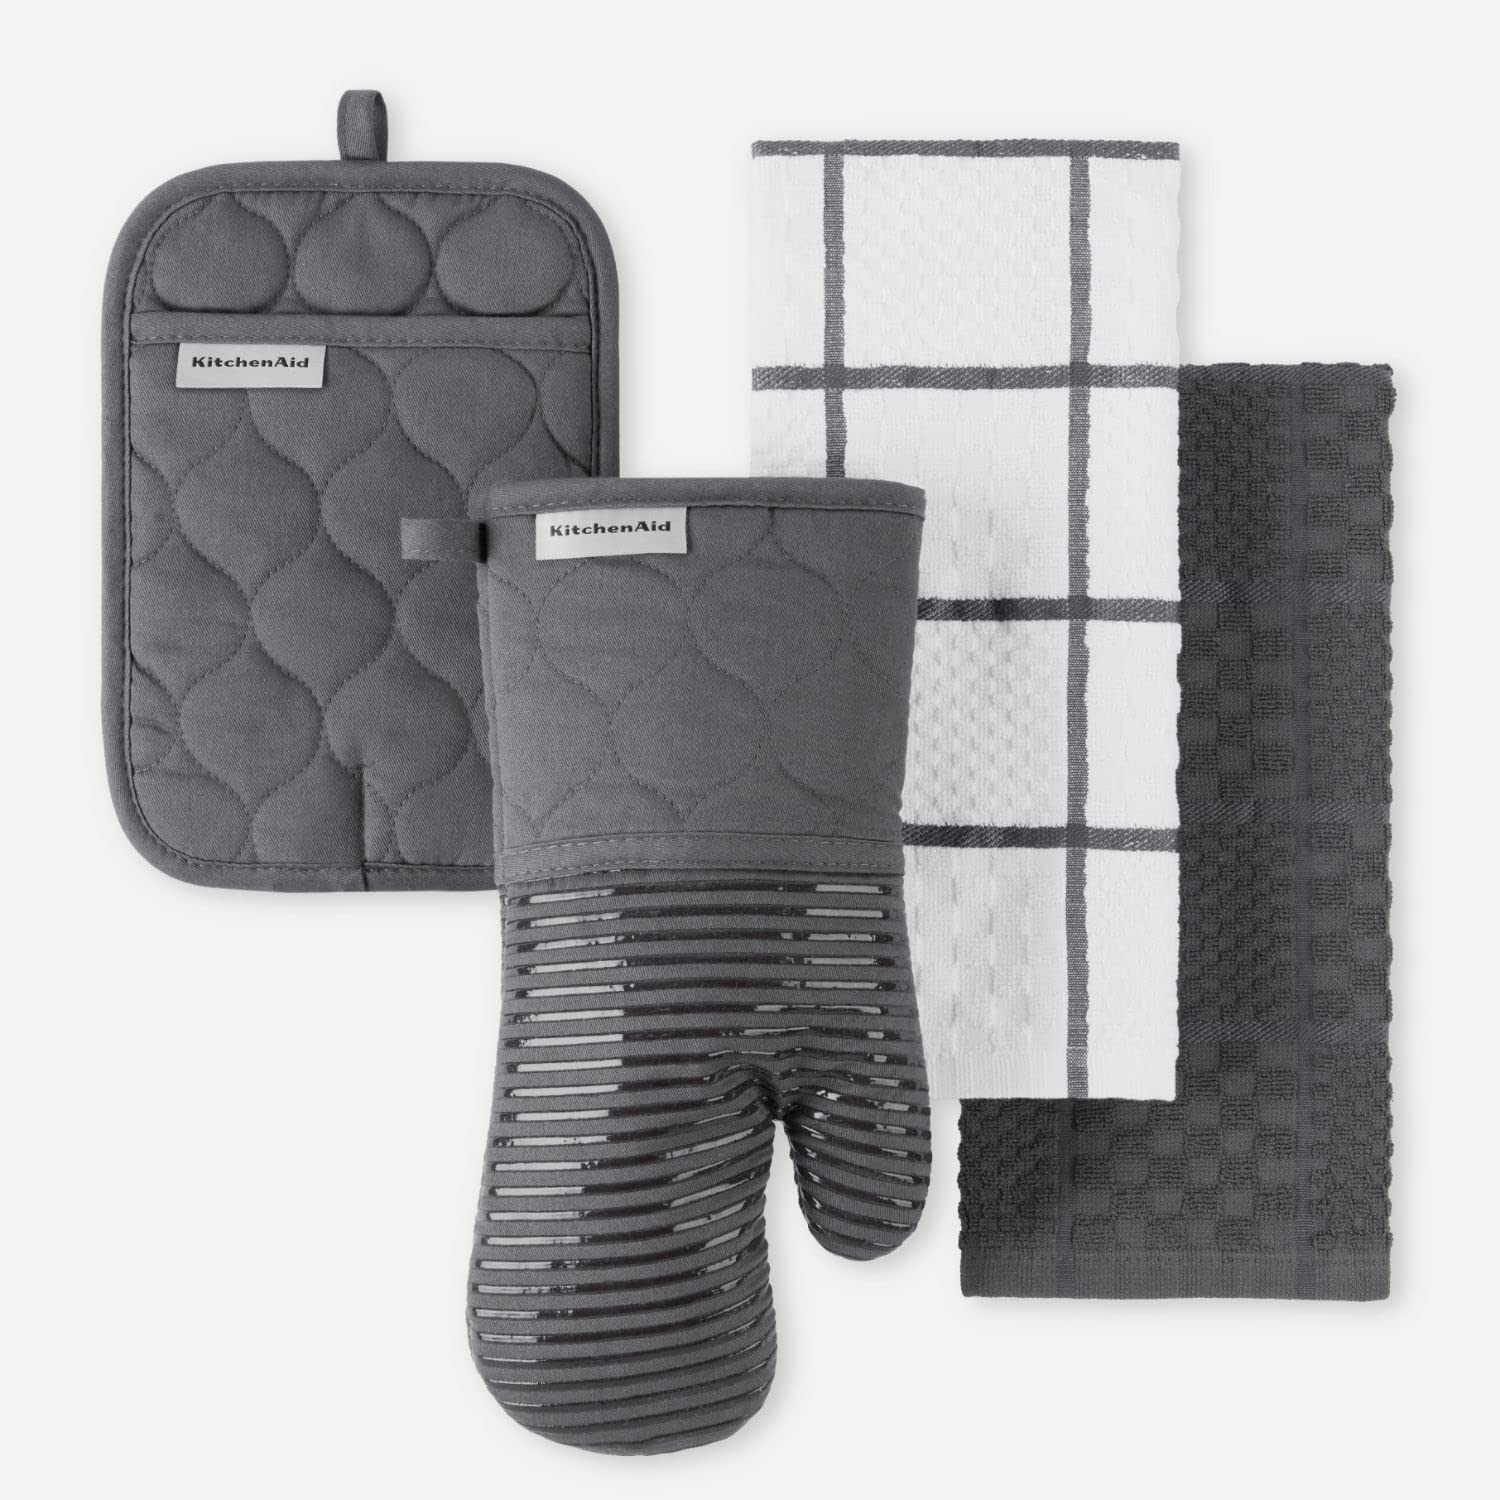 4-Piece KitchenAid Onion Quilt Kitchen Towels, Oven Mitt & Potholder Set (Charcoal Grey) $16 + Free Shipping w/ Prime or $35+